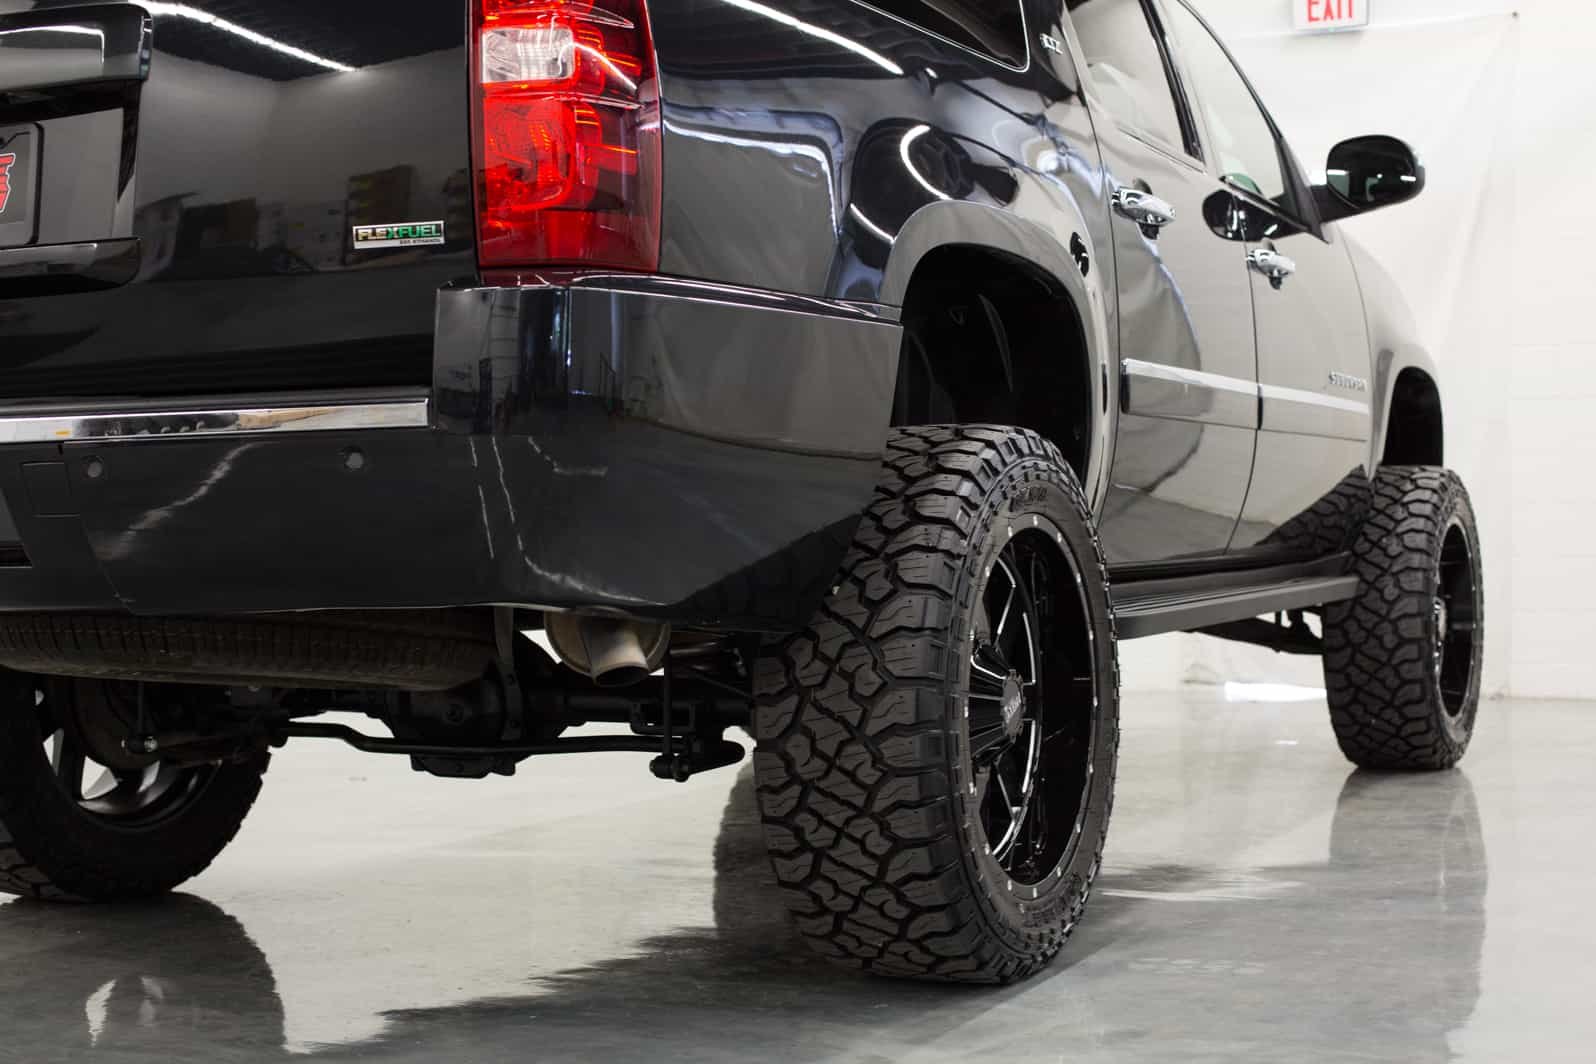 2010 Chevy Suburban Lifted